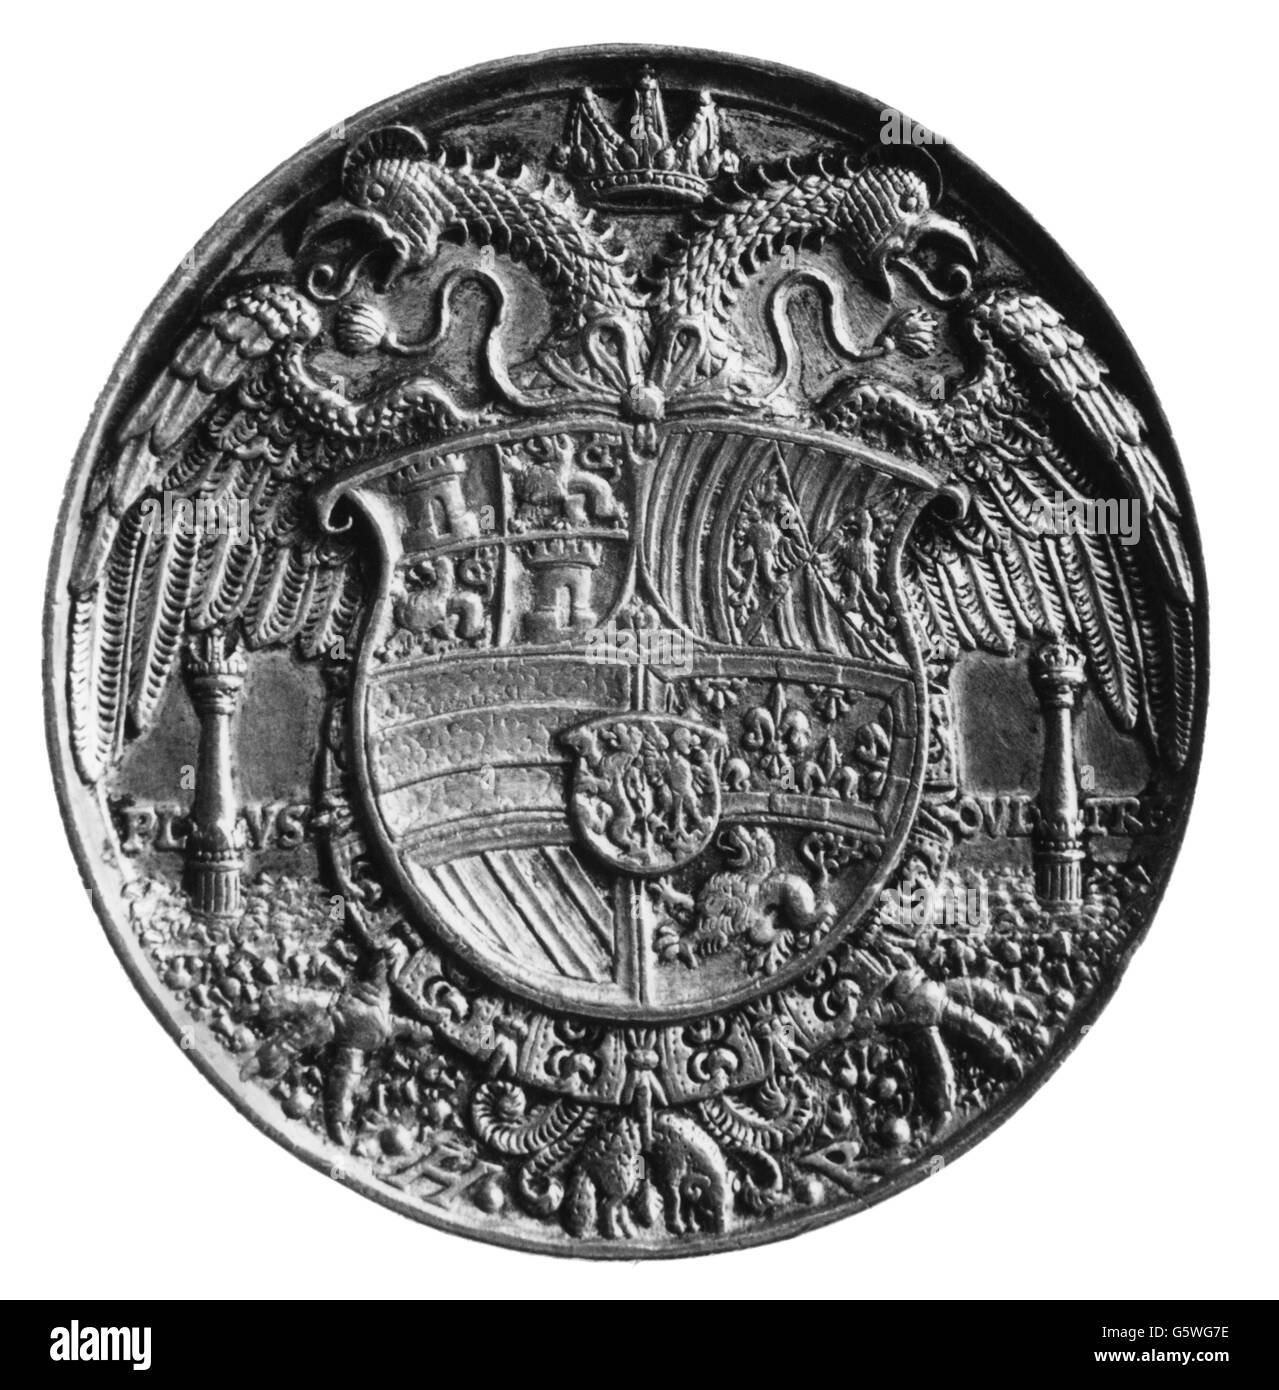 fine arts, Hans Reinhart the Elder (circa 1510 - 1581), medal, cast medal for emperor Charles V, reverse, 1537, bronze, diameter 66 mm, Additional-Rights-Clearences-Not Available Stock Photo